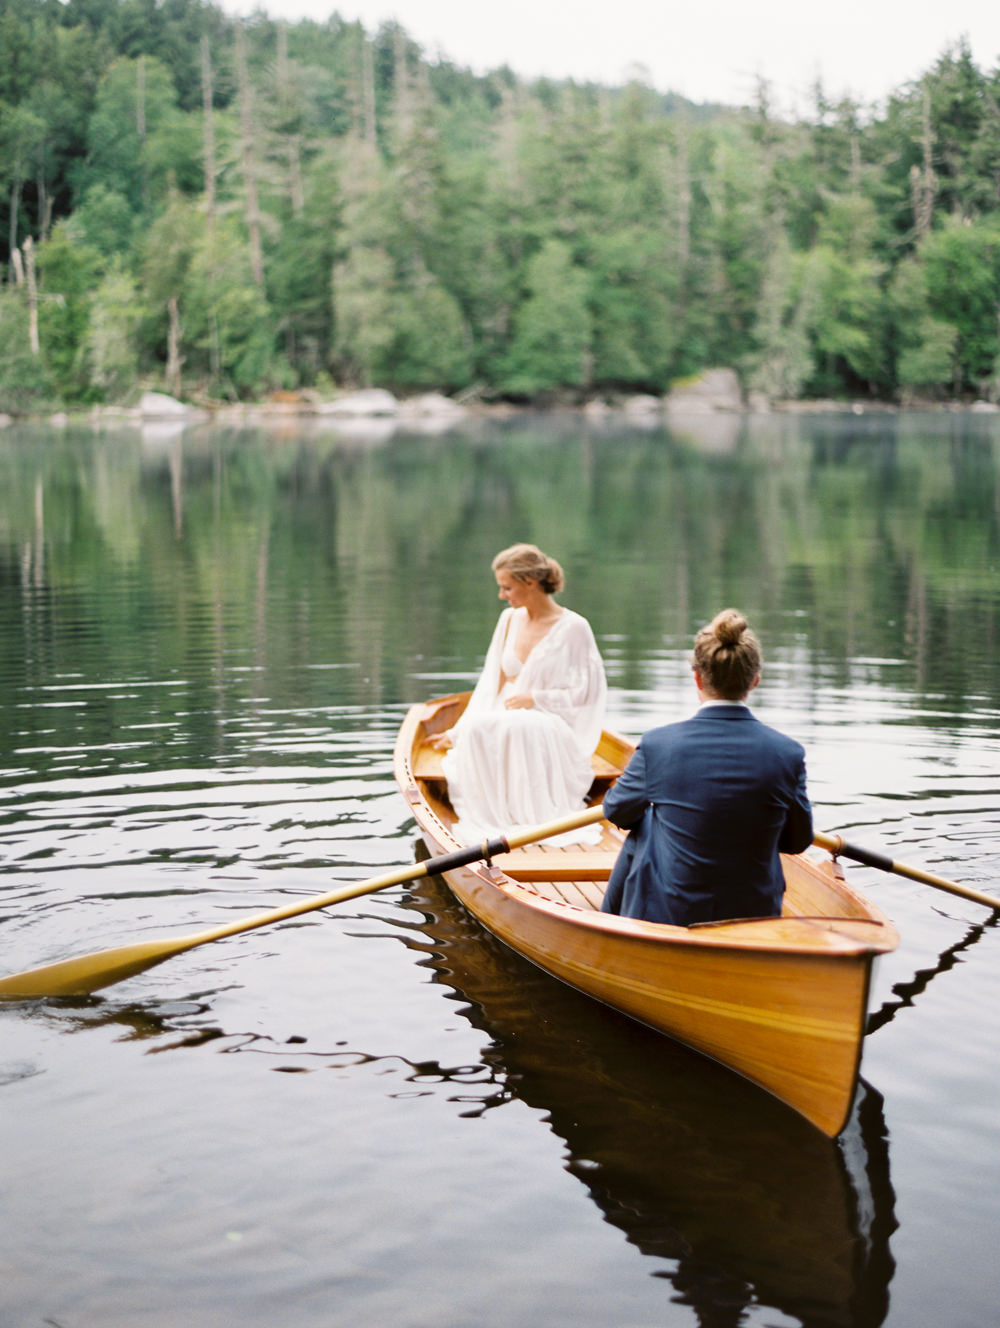 couples paddles out in water in wooden row boat guide boat in Adirondacks for island elopement | film photography workshop | Mary Dougherty